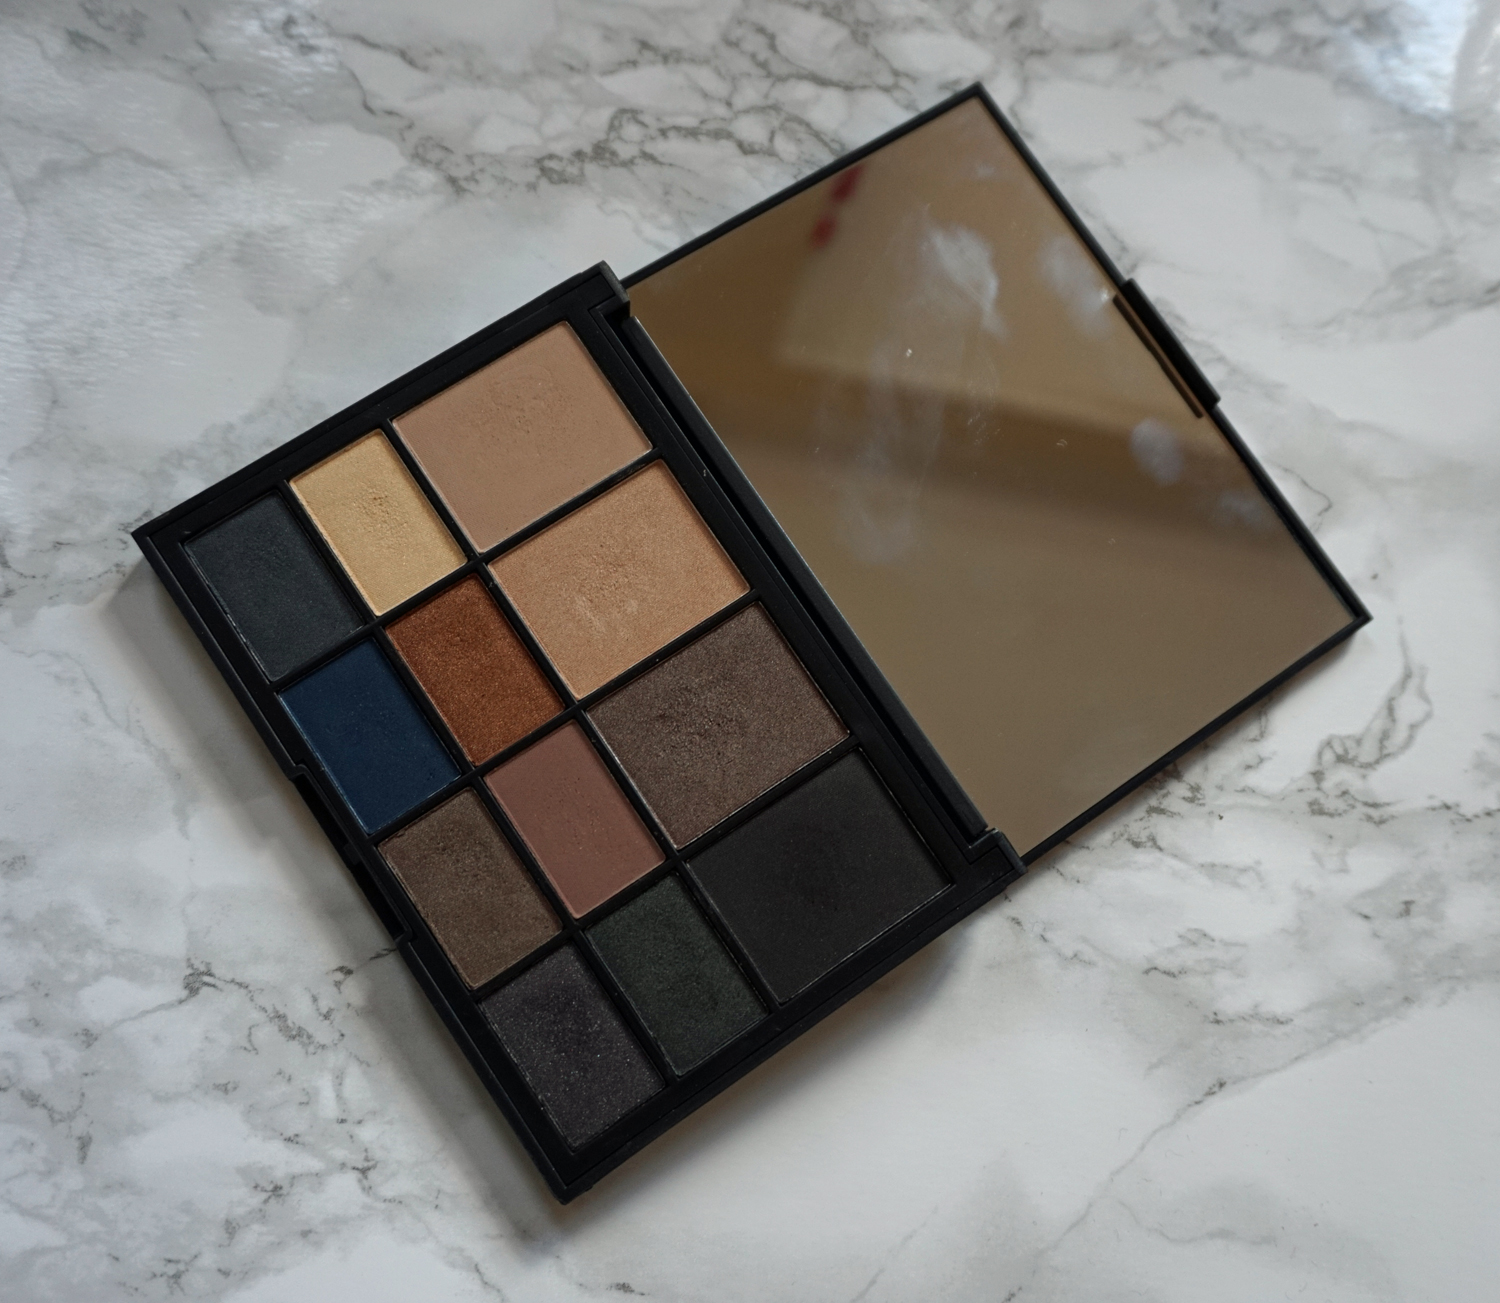 NARS L'amour toujours l'amour eyeshadow palette flatlay